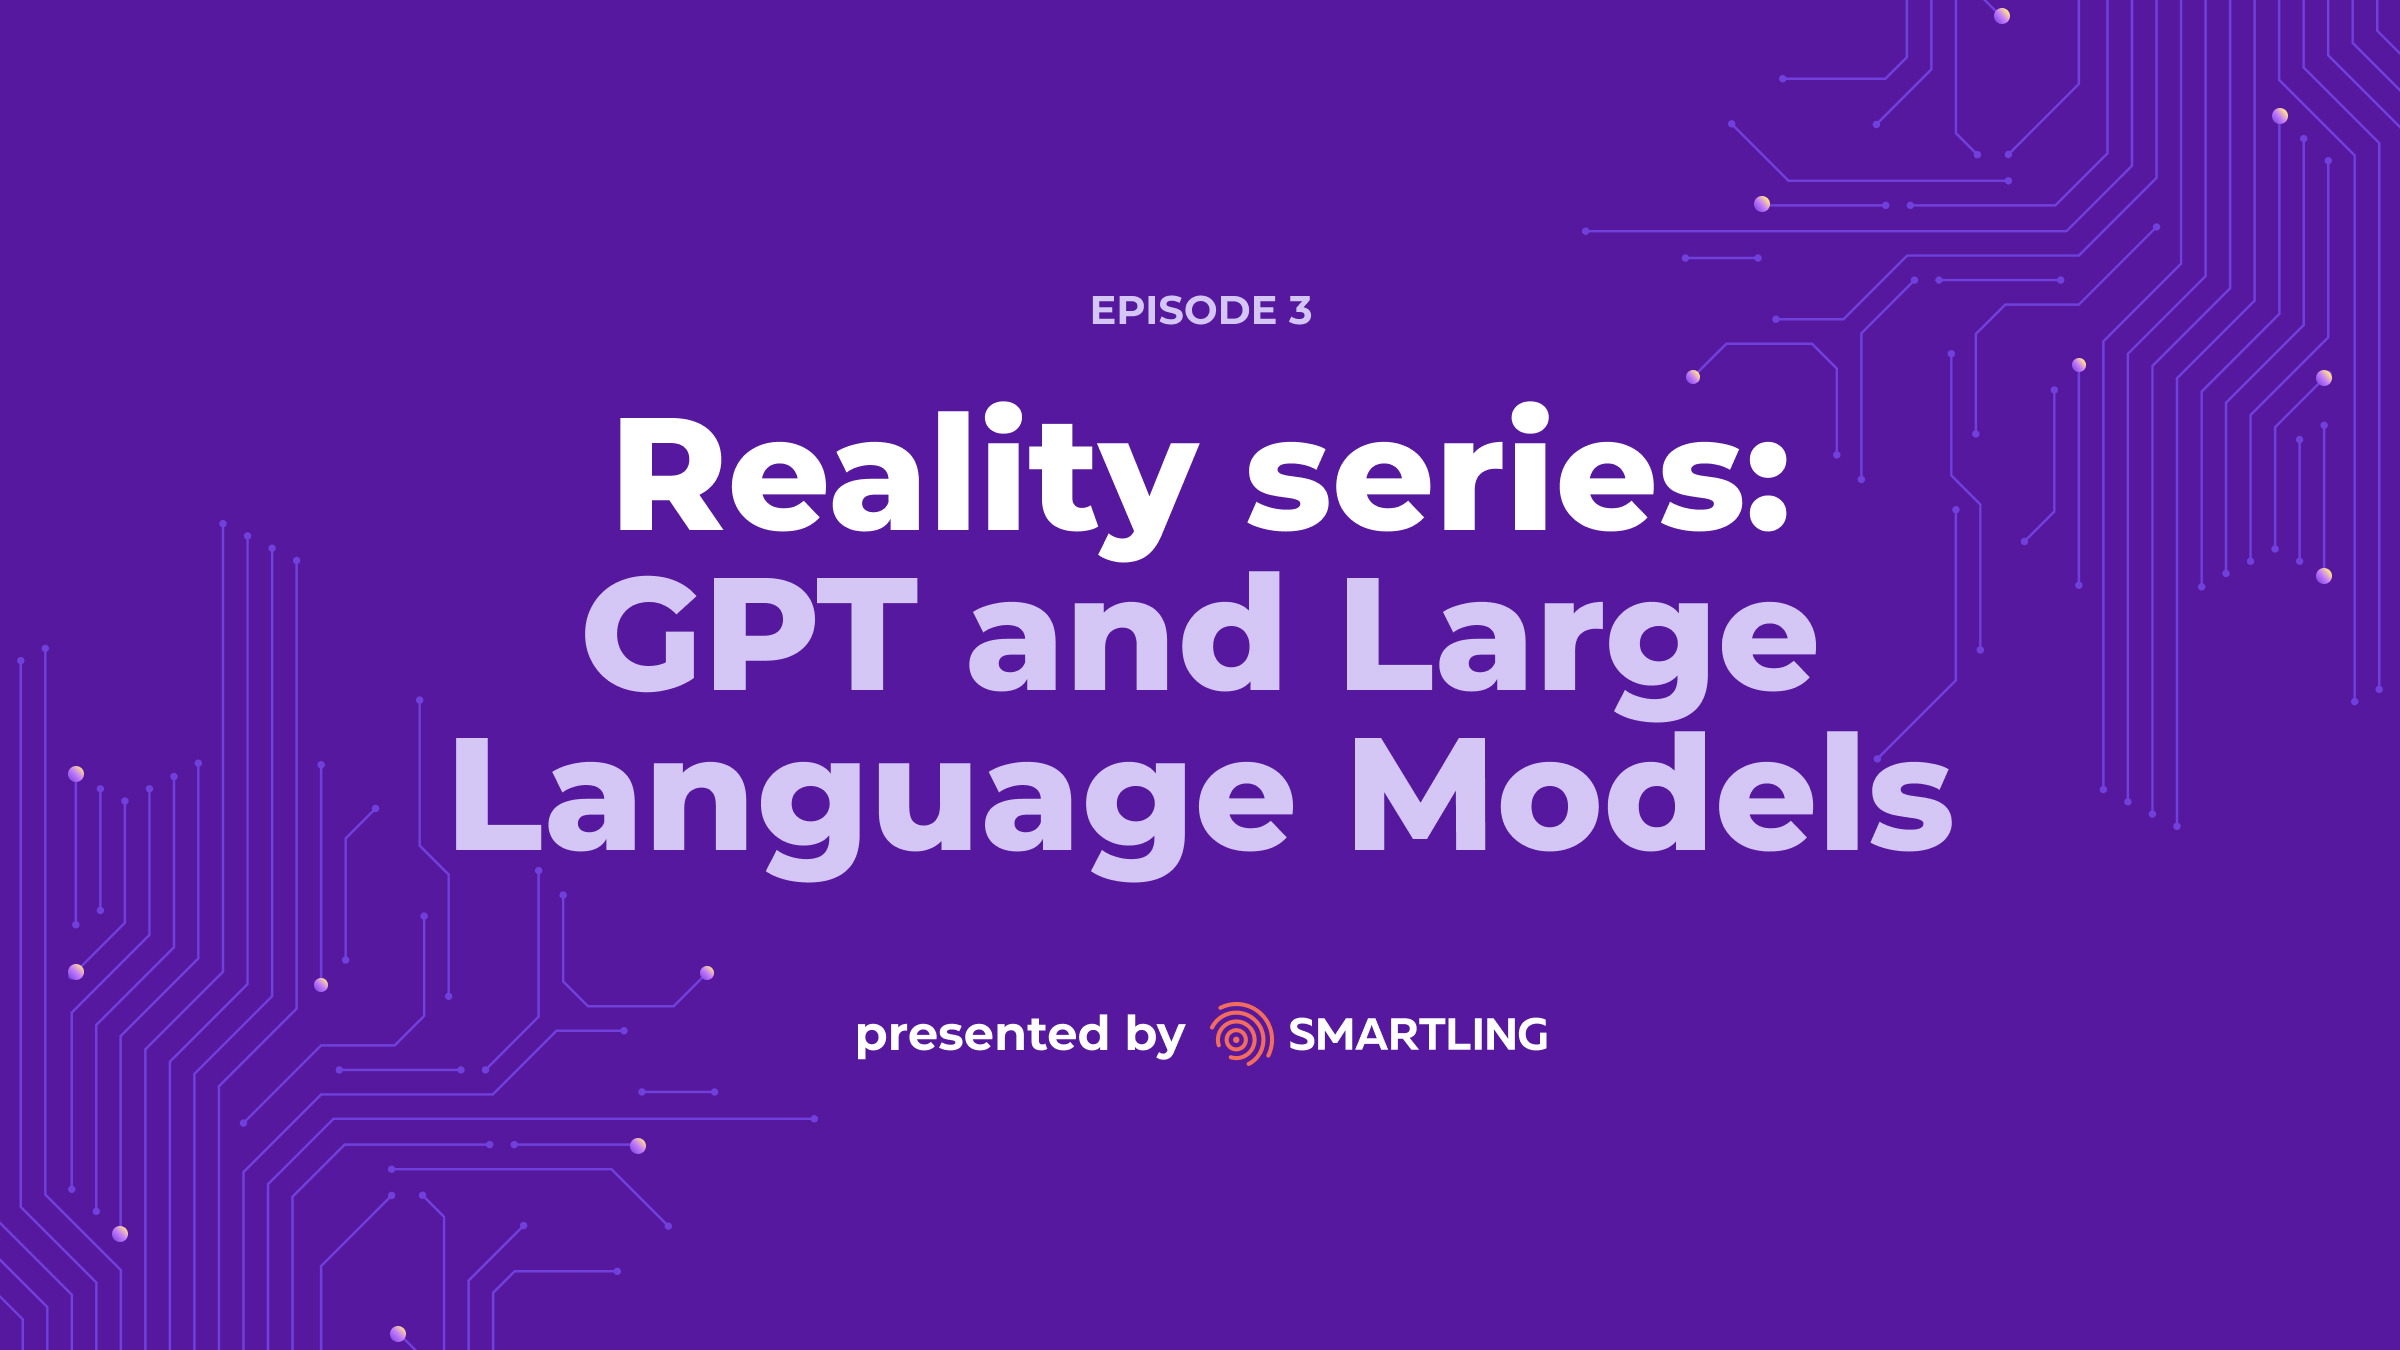 Smartling virtual event: Reality Series - Episode 3 GPT and Large  Language Models